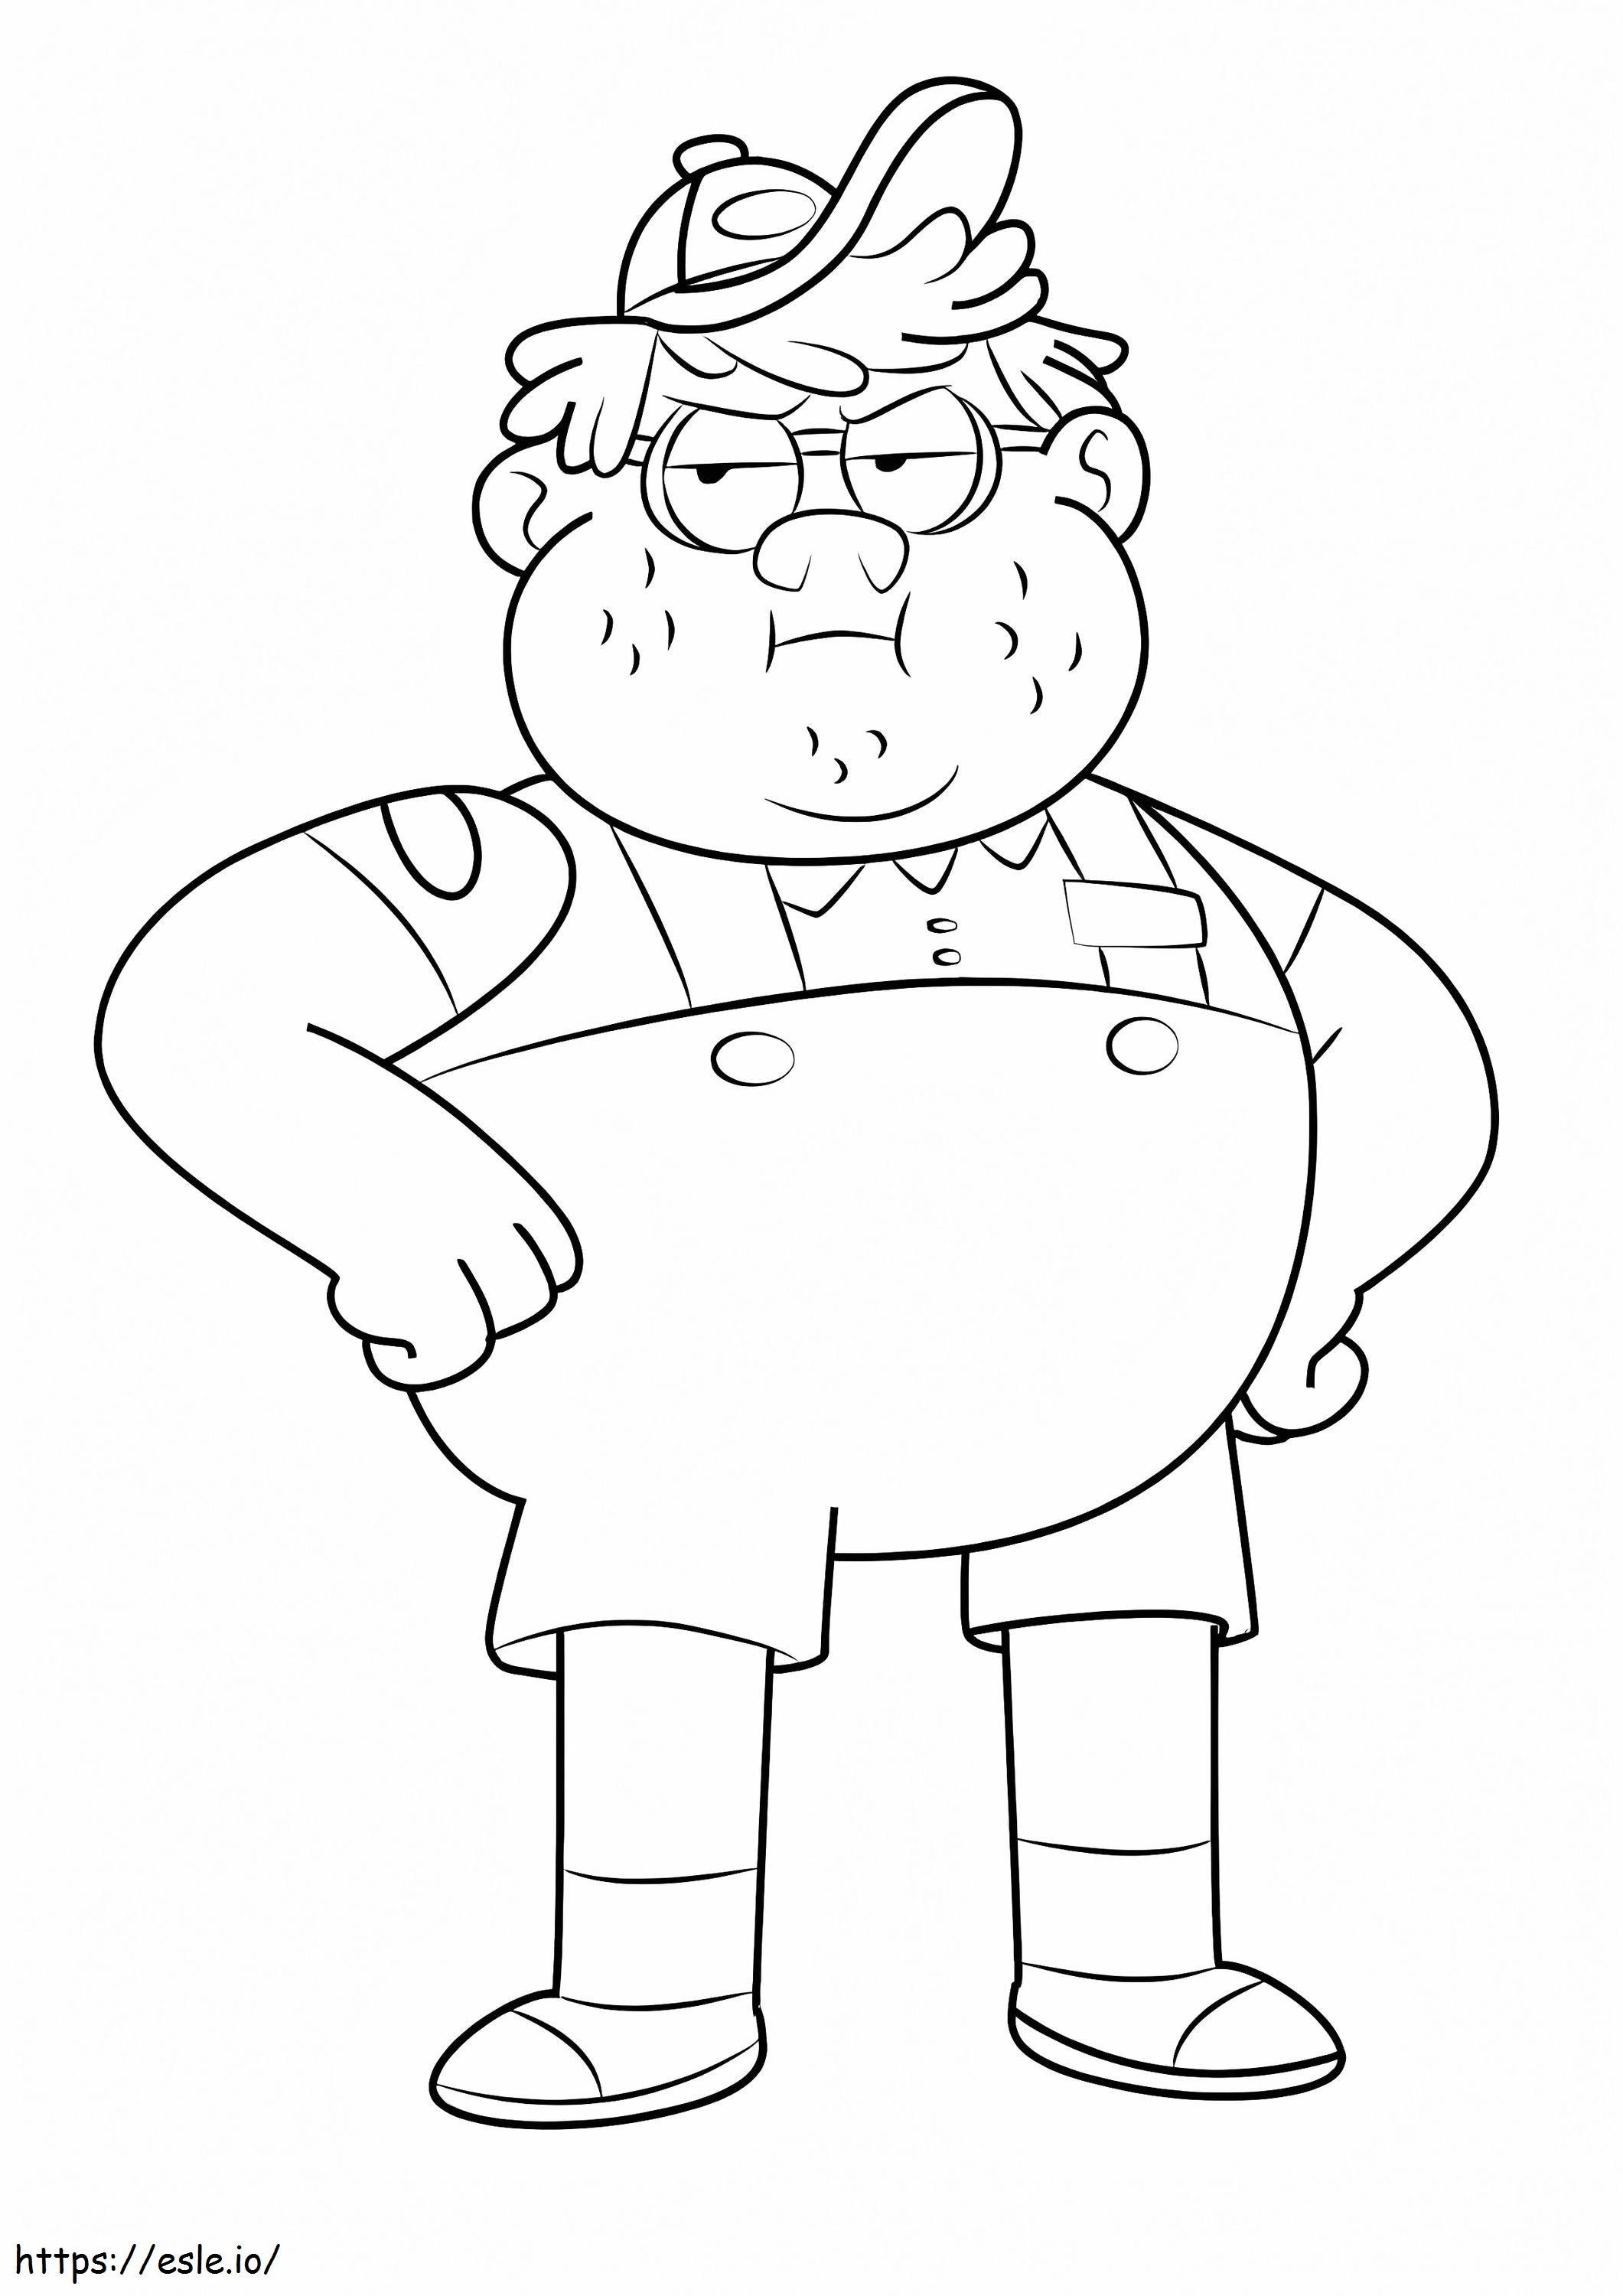 Jimmy From Uncle Grandpa coloring page